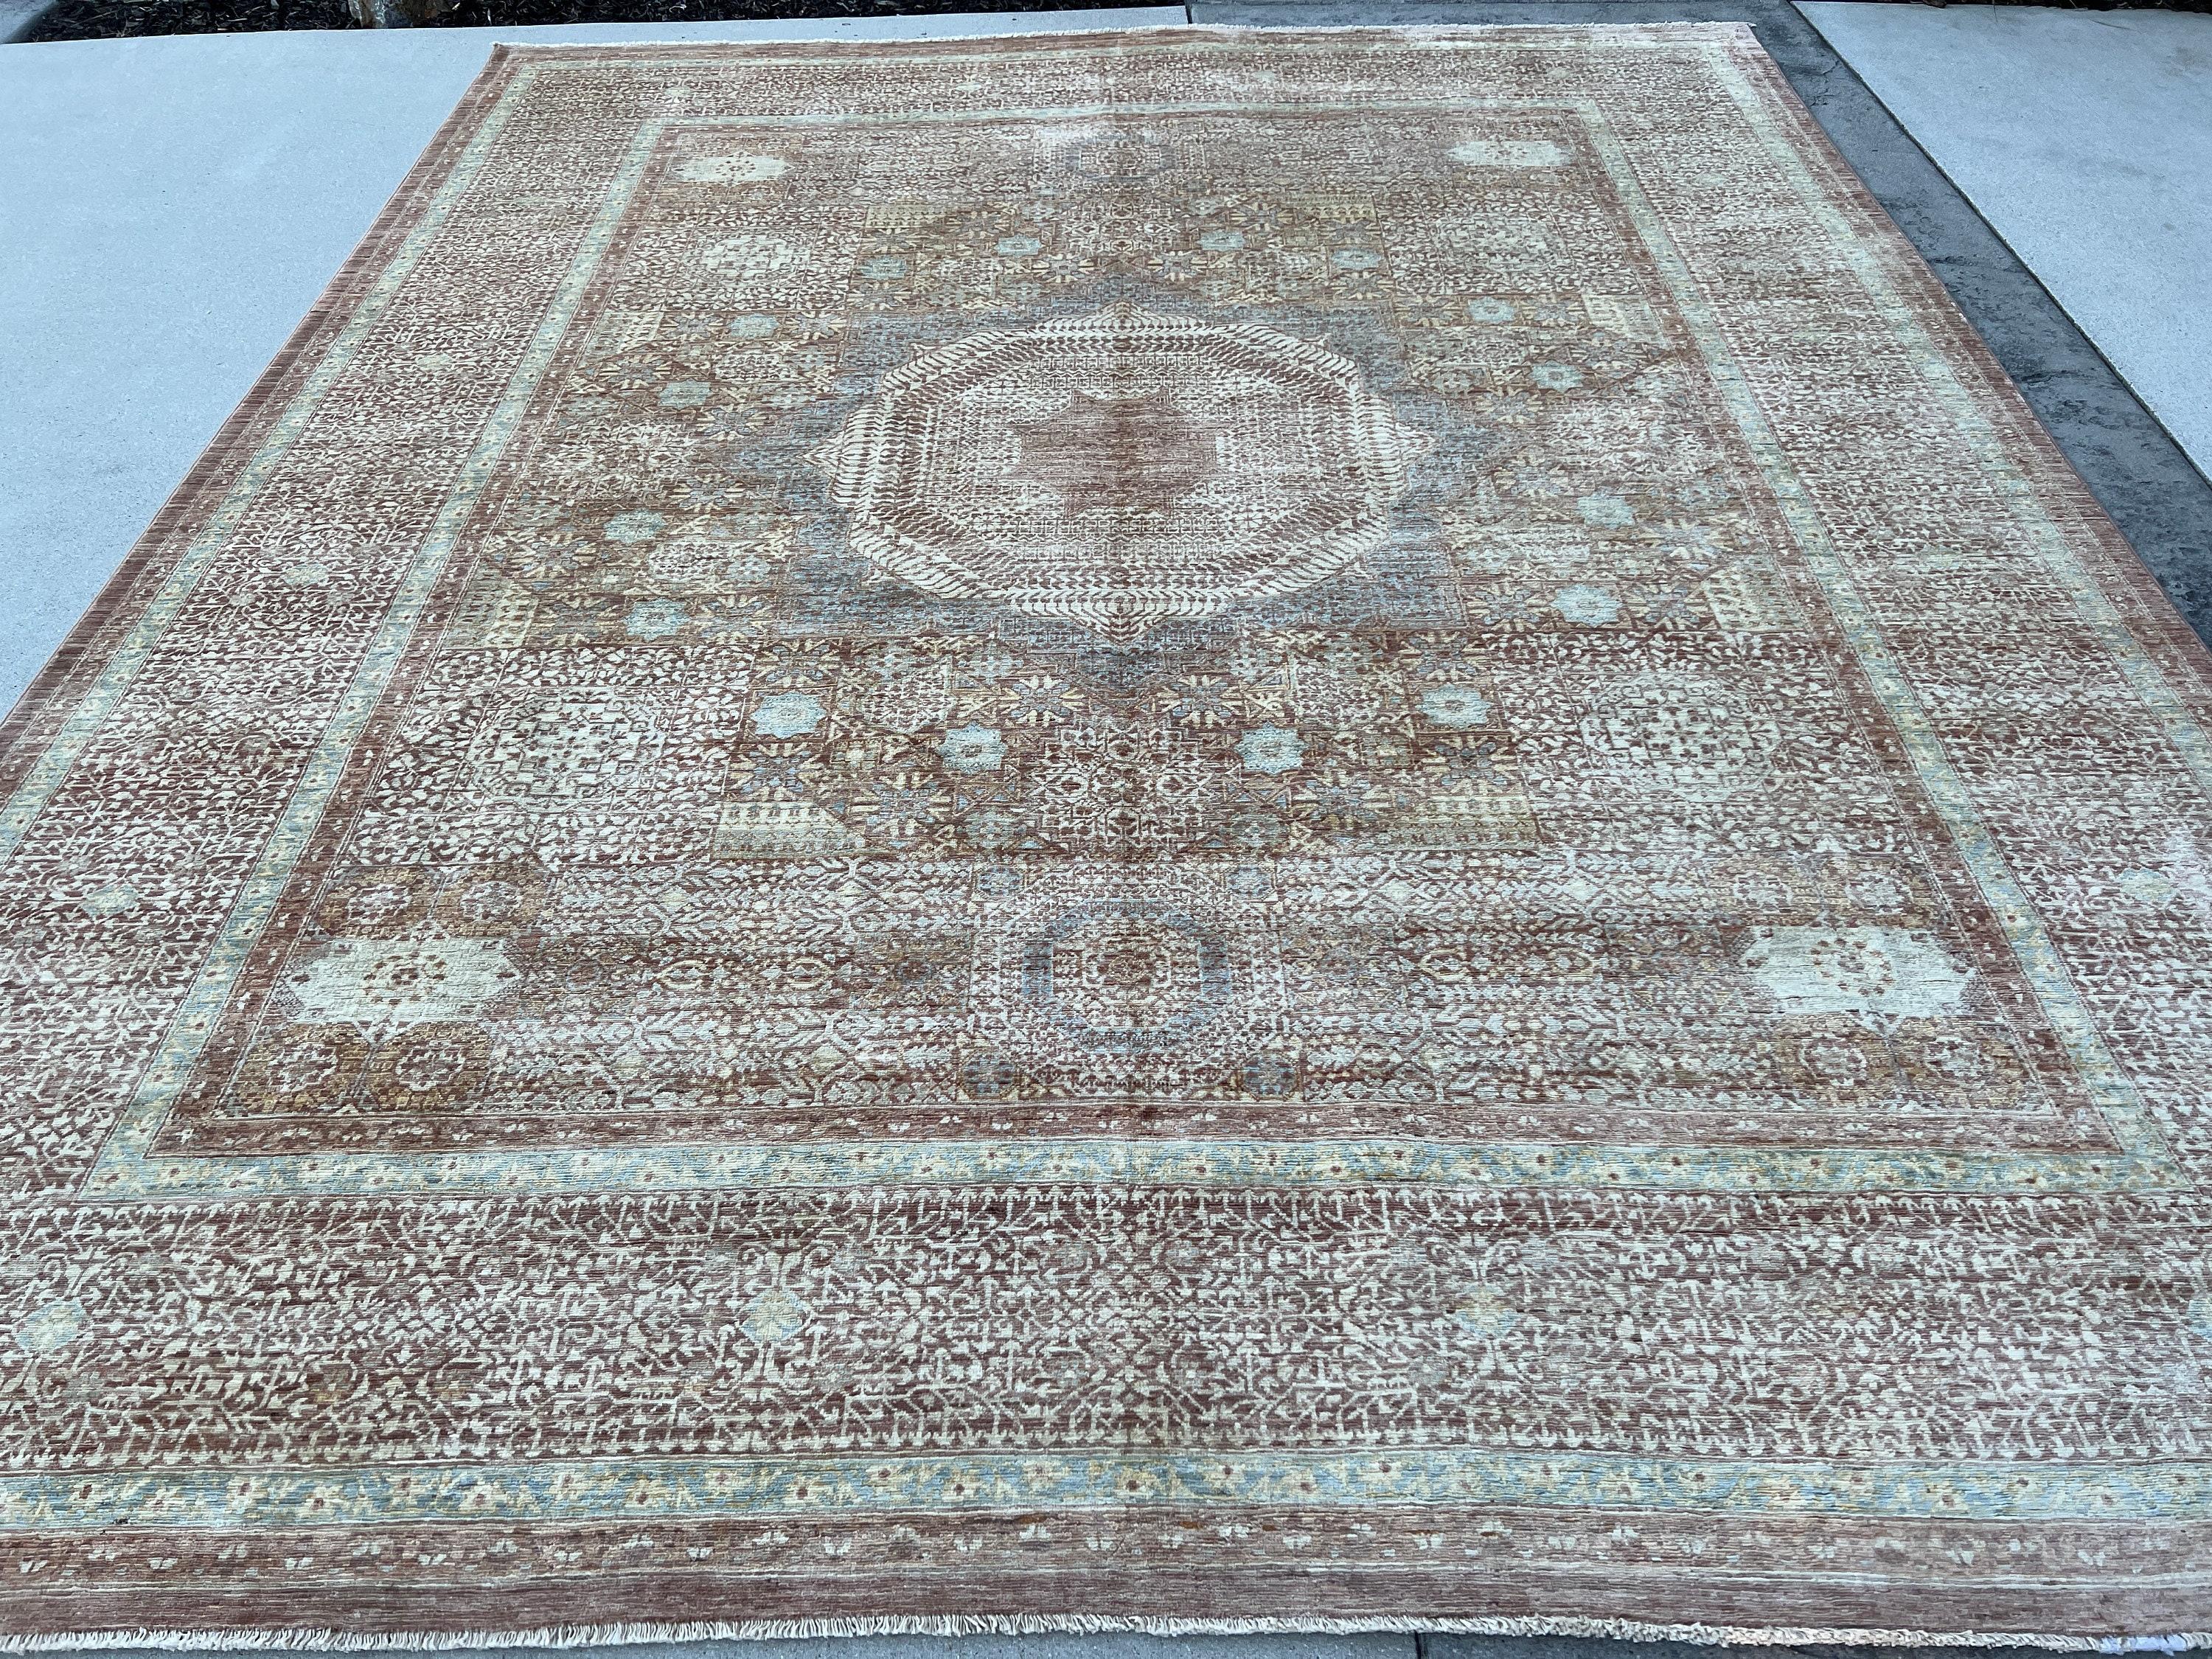 8x10 Hand-Knotted Afghan Mamluk Rug Premium Hand-Spun Afghan Wool Fair Trade In New Condition For Sale In San Marcos, CA